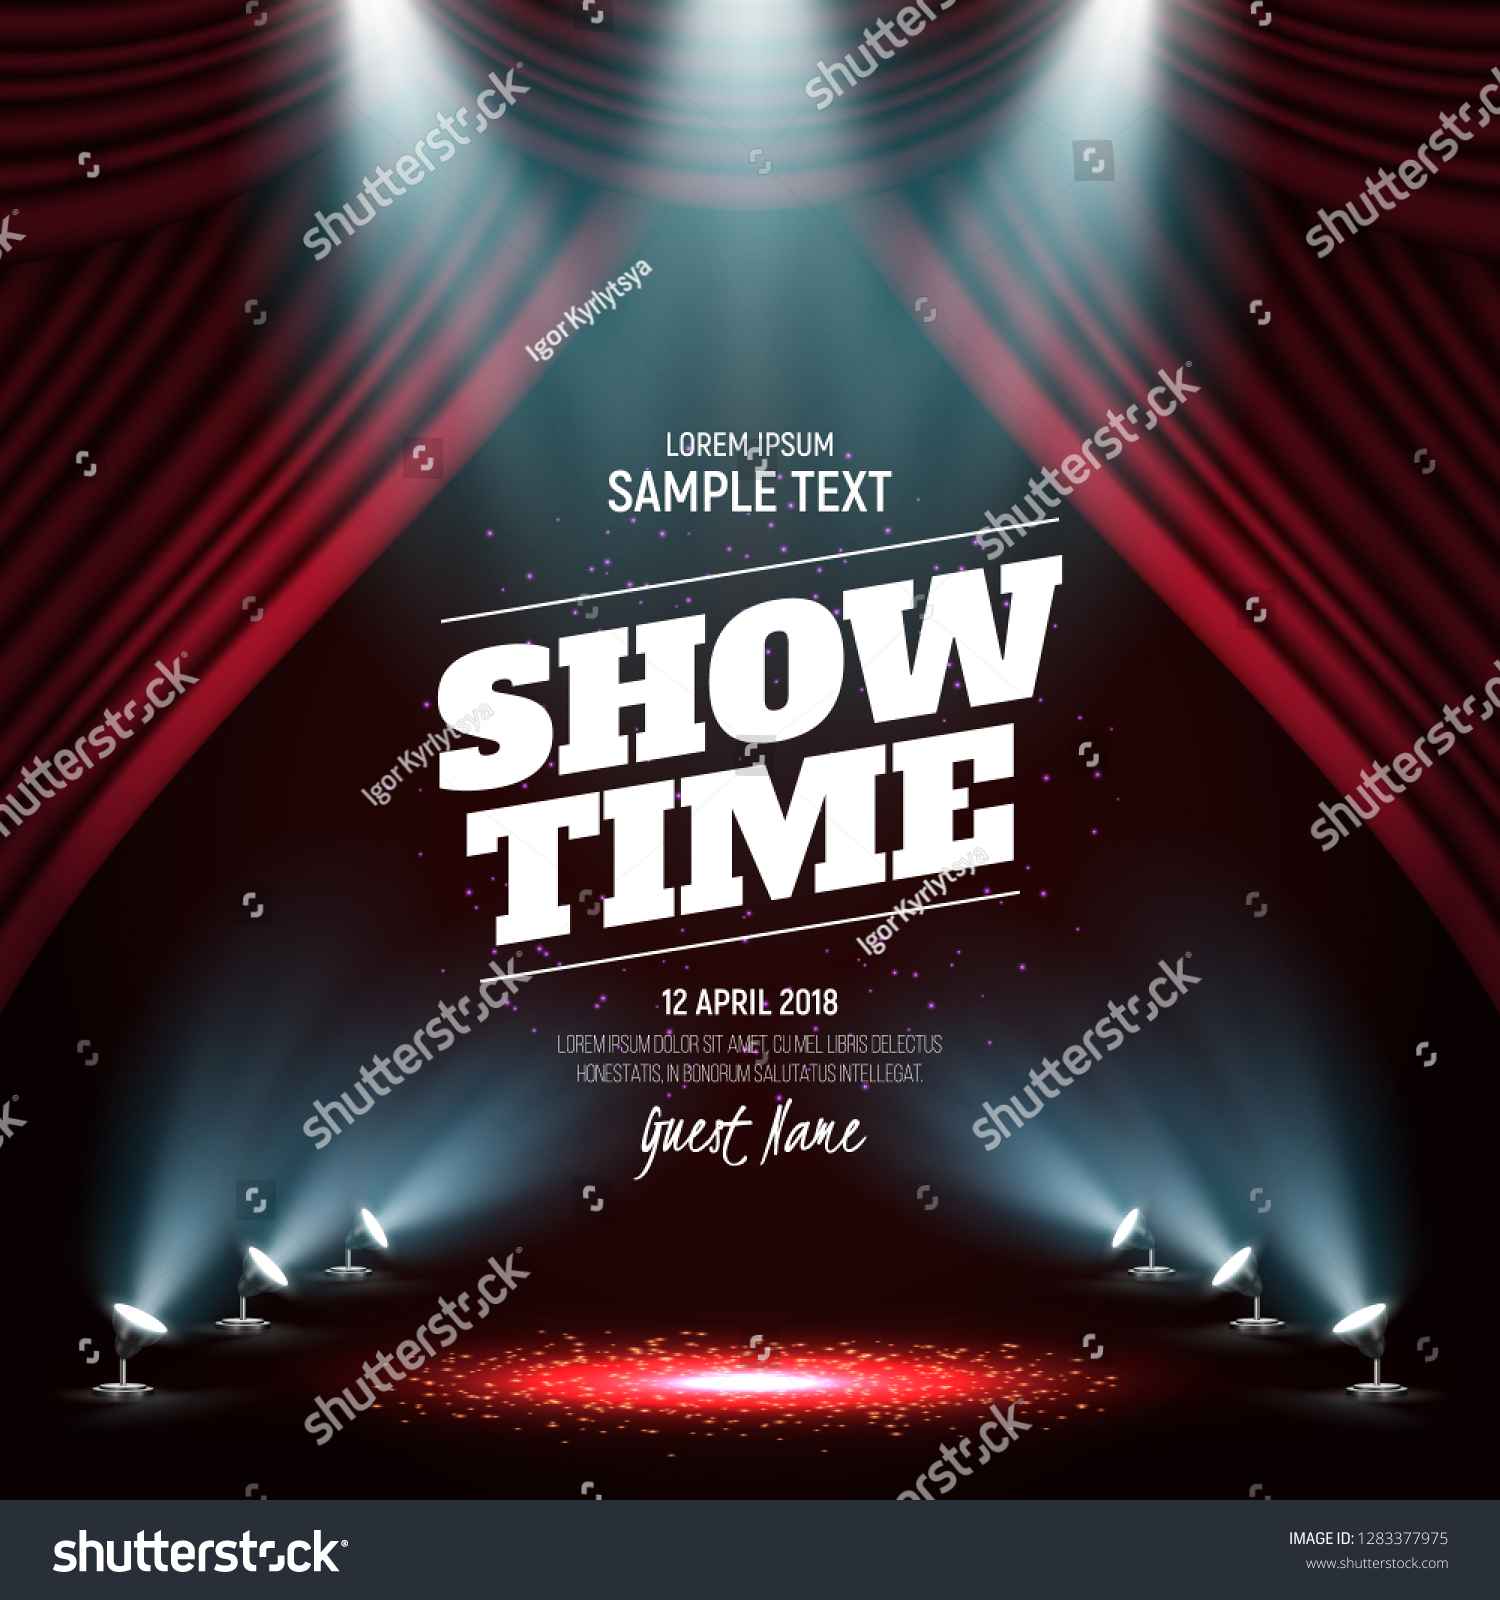 SVG of Showtime banner with curtain illuminated by spotlights. Vector illustration. svg